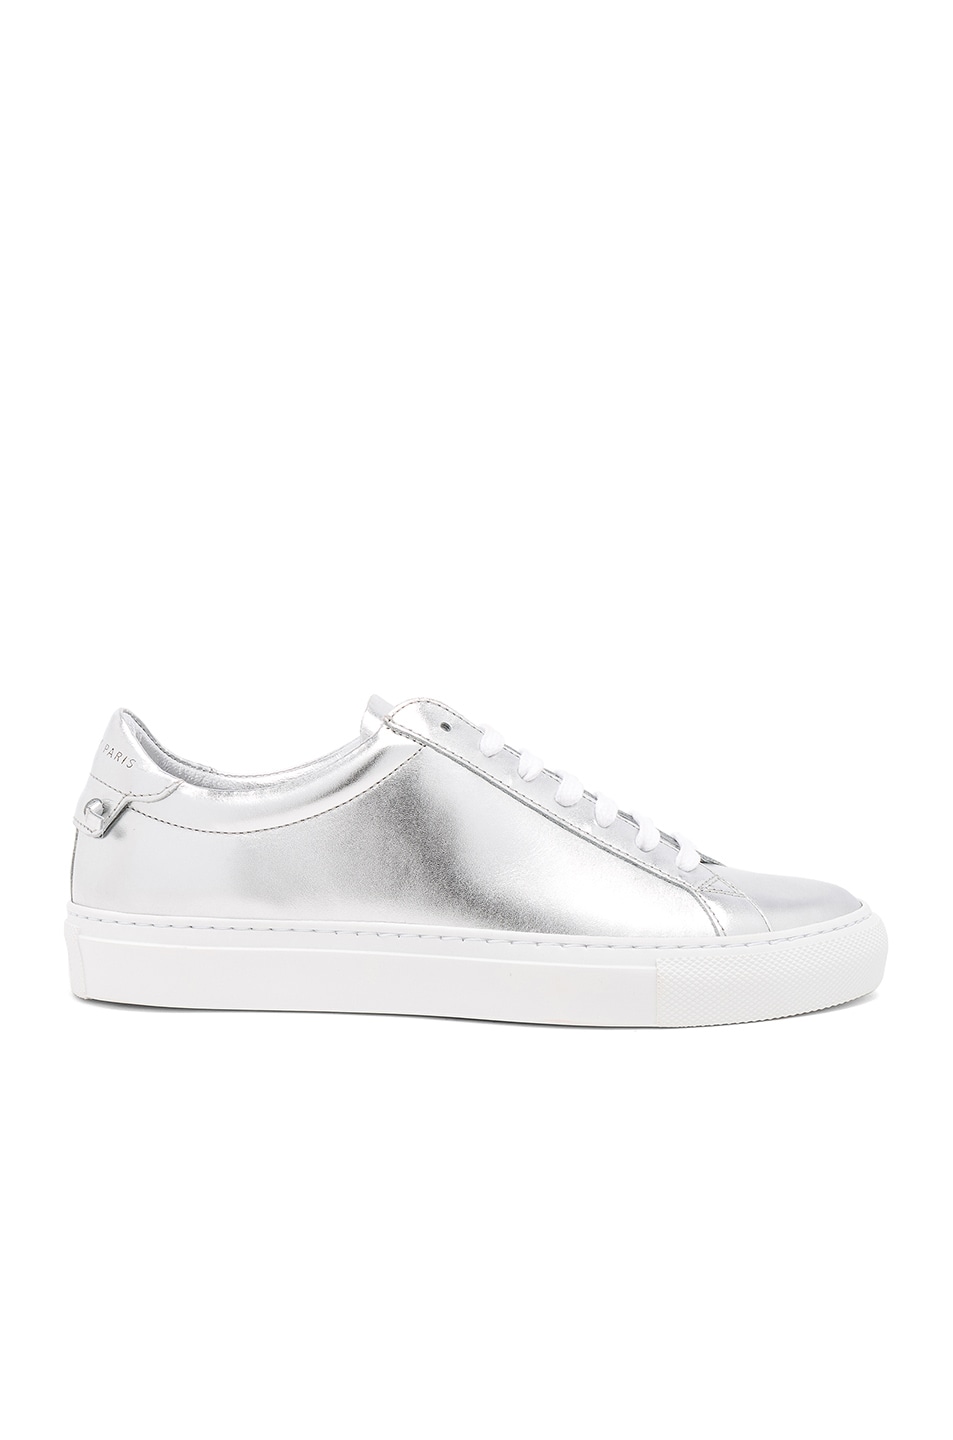 Image 1 of Givenchy Metallic Leather Urban Tie Knot Sneakers in Silver